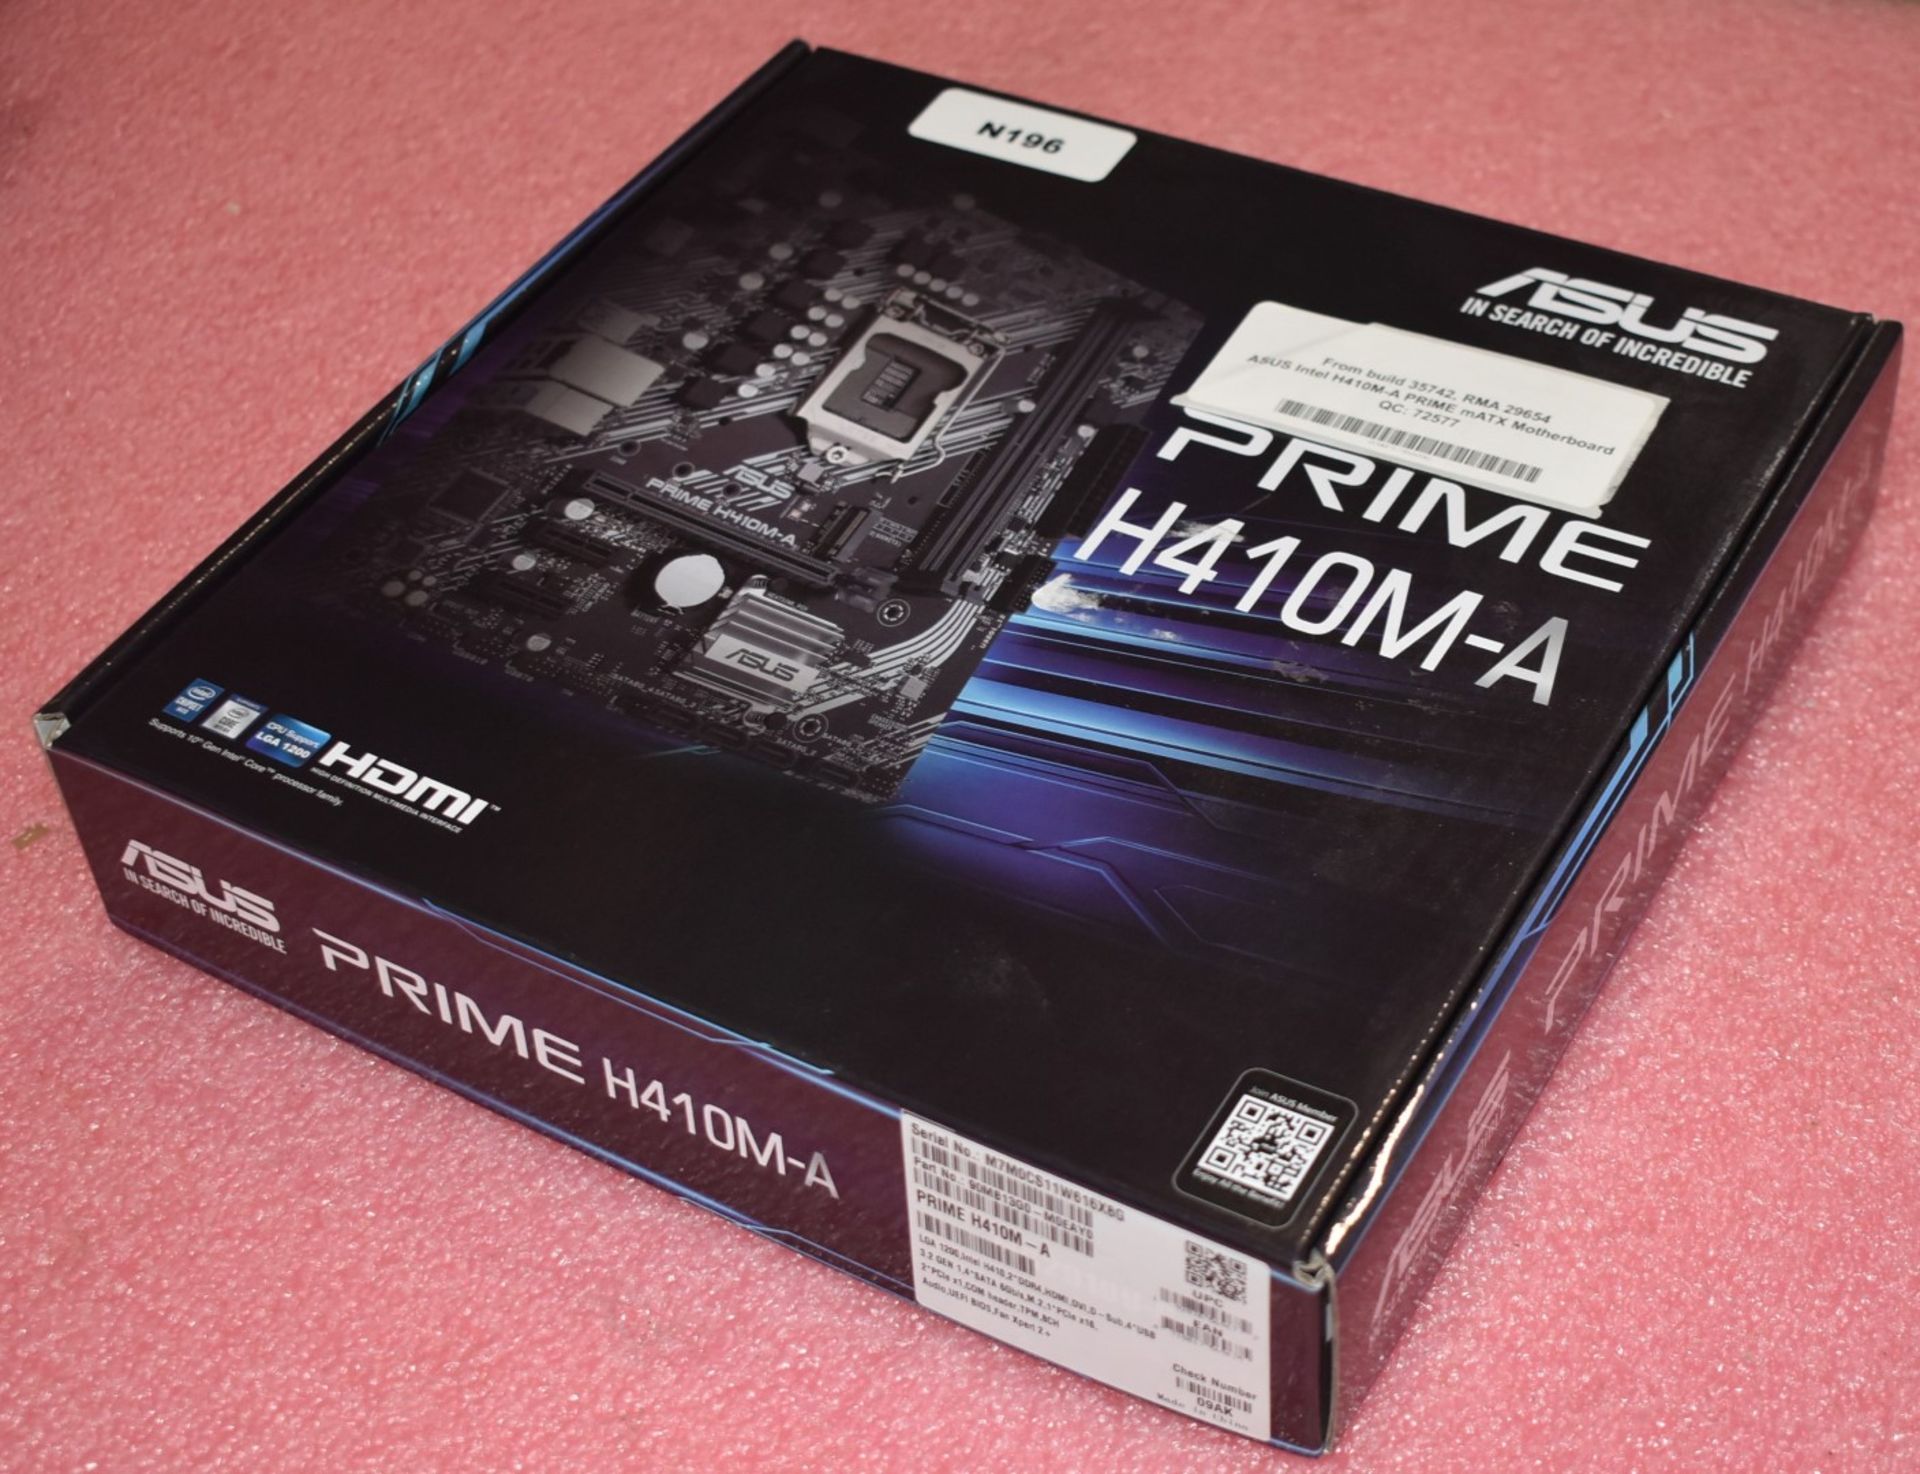 1 x Asus Prime H410M-E Intel LGA1200 Motherboard - Boxed With Accessories